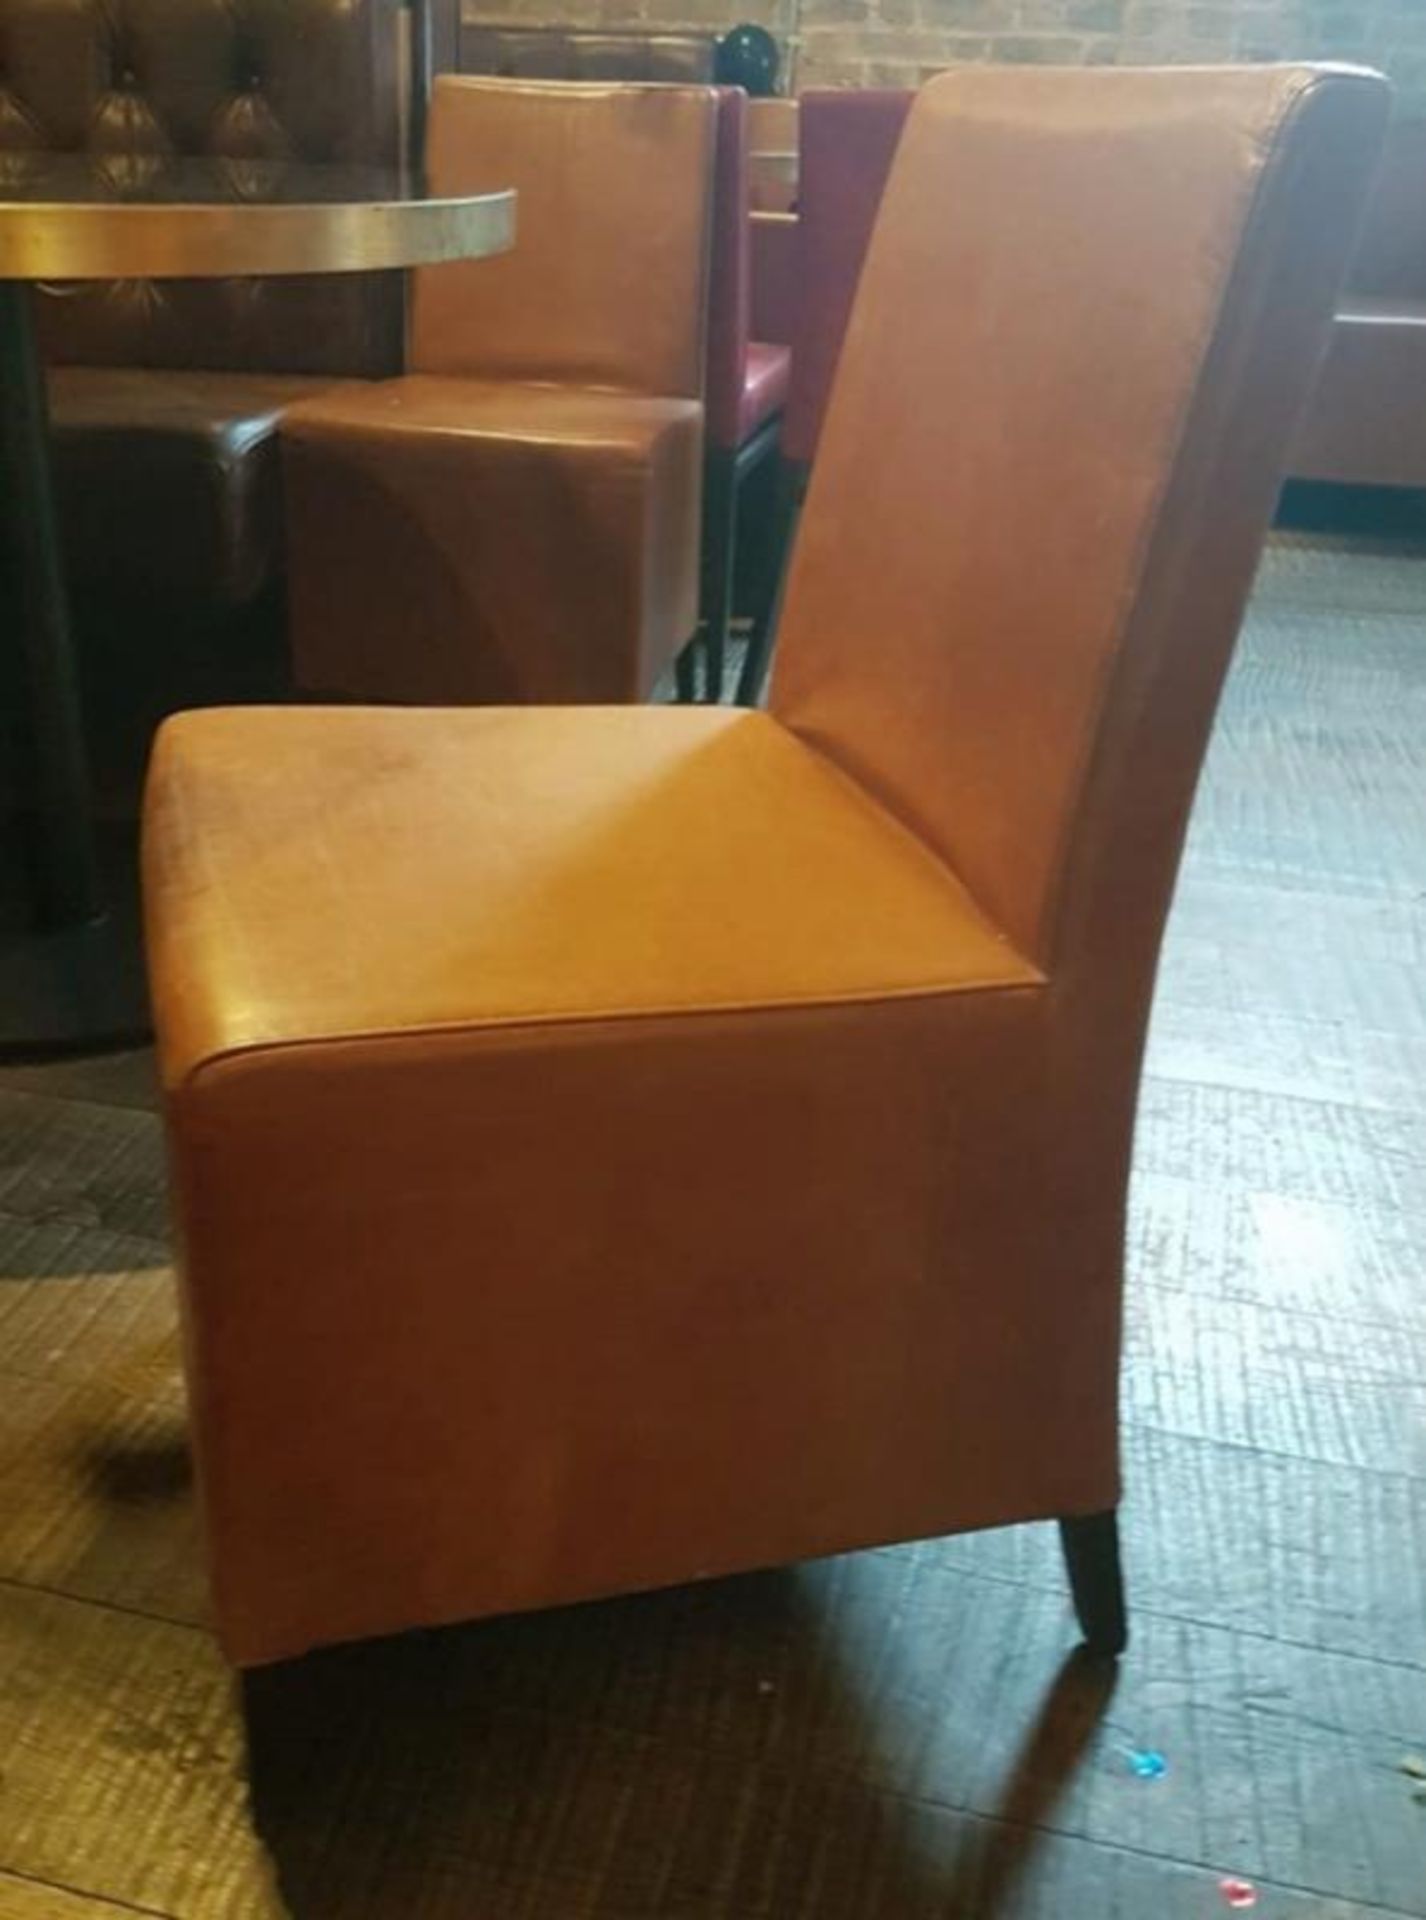 4 x Leather Upholstered Chairs In Tan - Recently Removed From A City Centre Steakhouse Restaurant - - Image 5 of 6